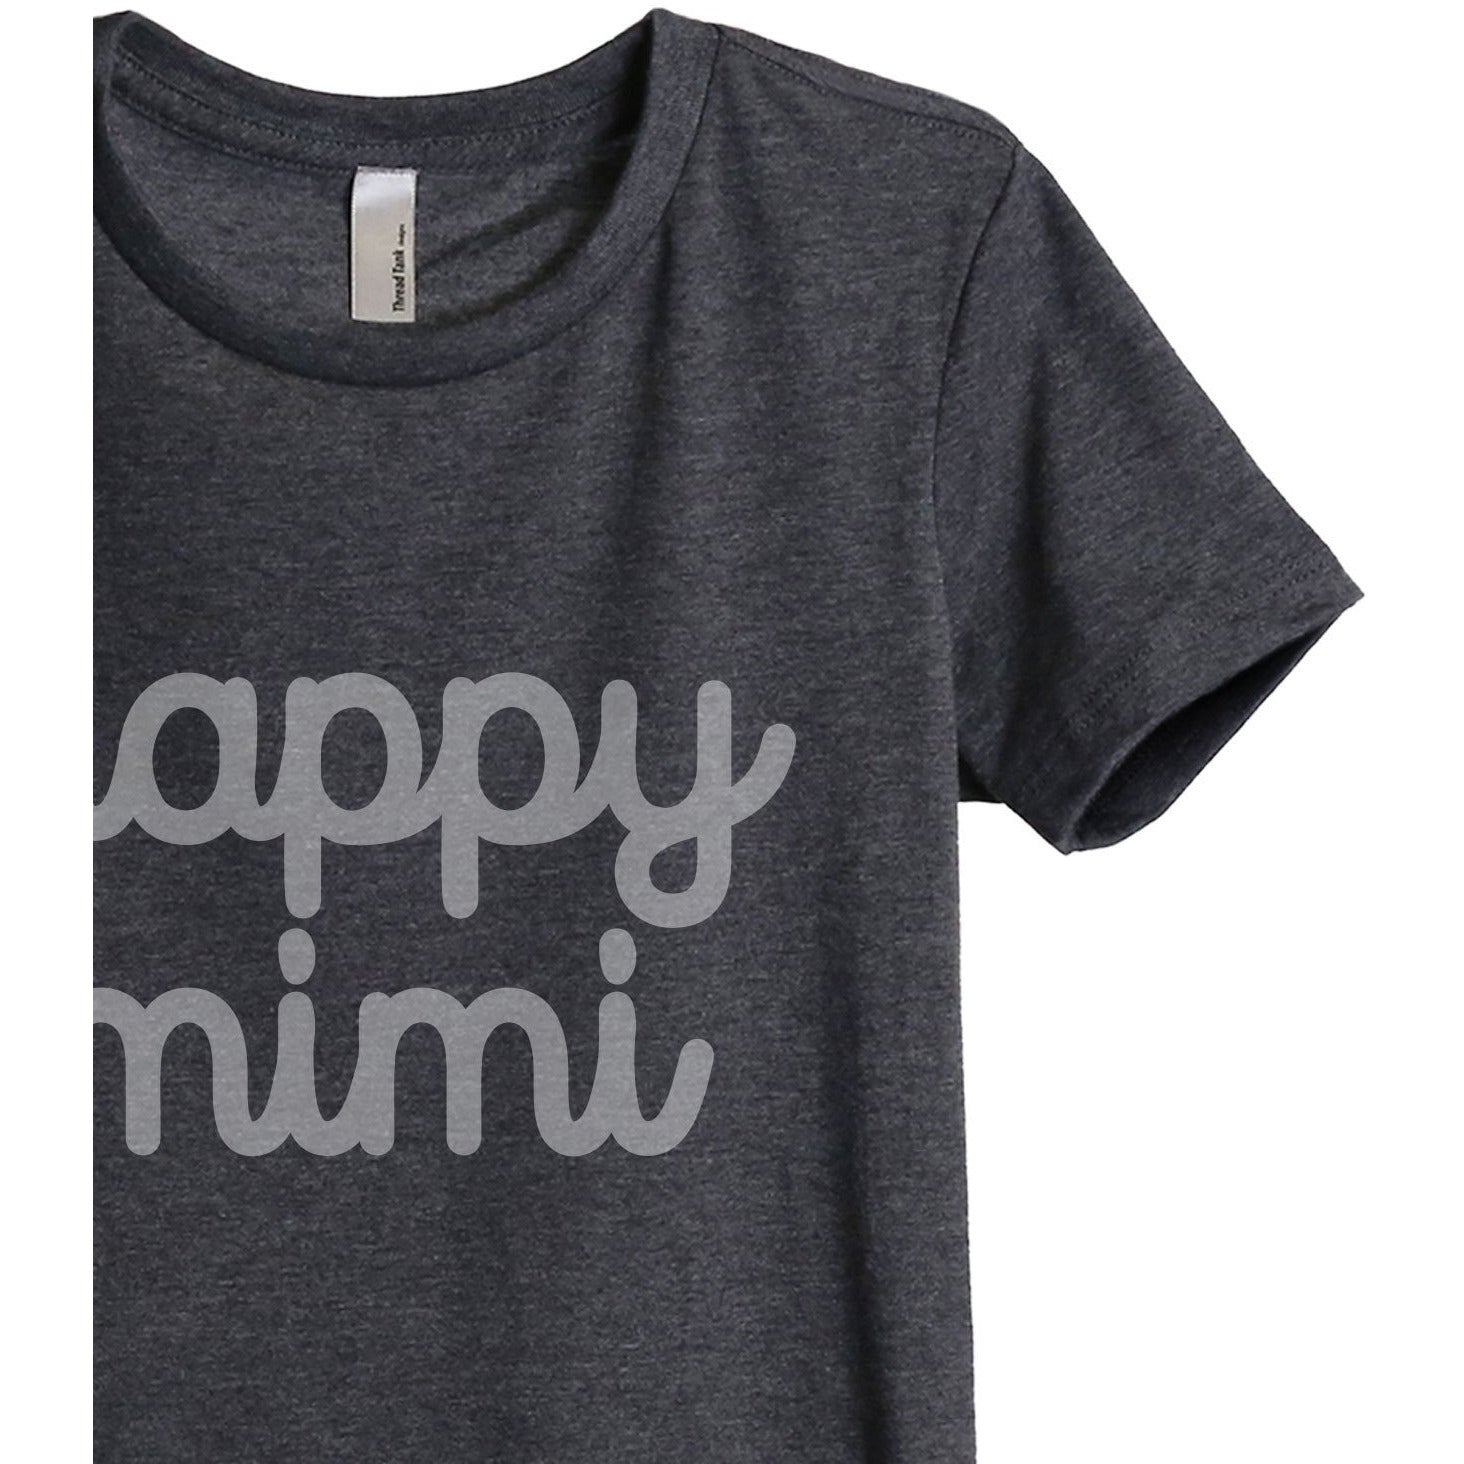 Happy Mimi Women's Relaxed Crewneck T-Shirt Top Tee Charcoal Grey Zoom Details